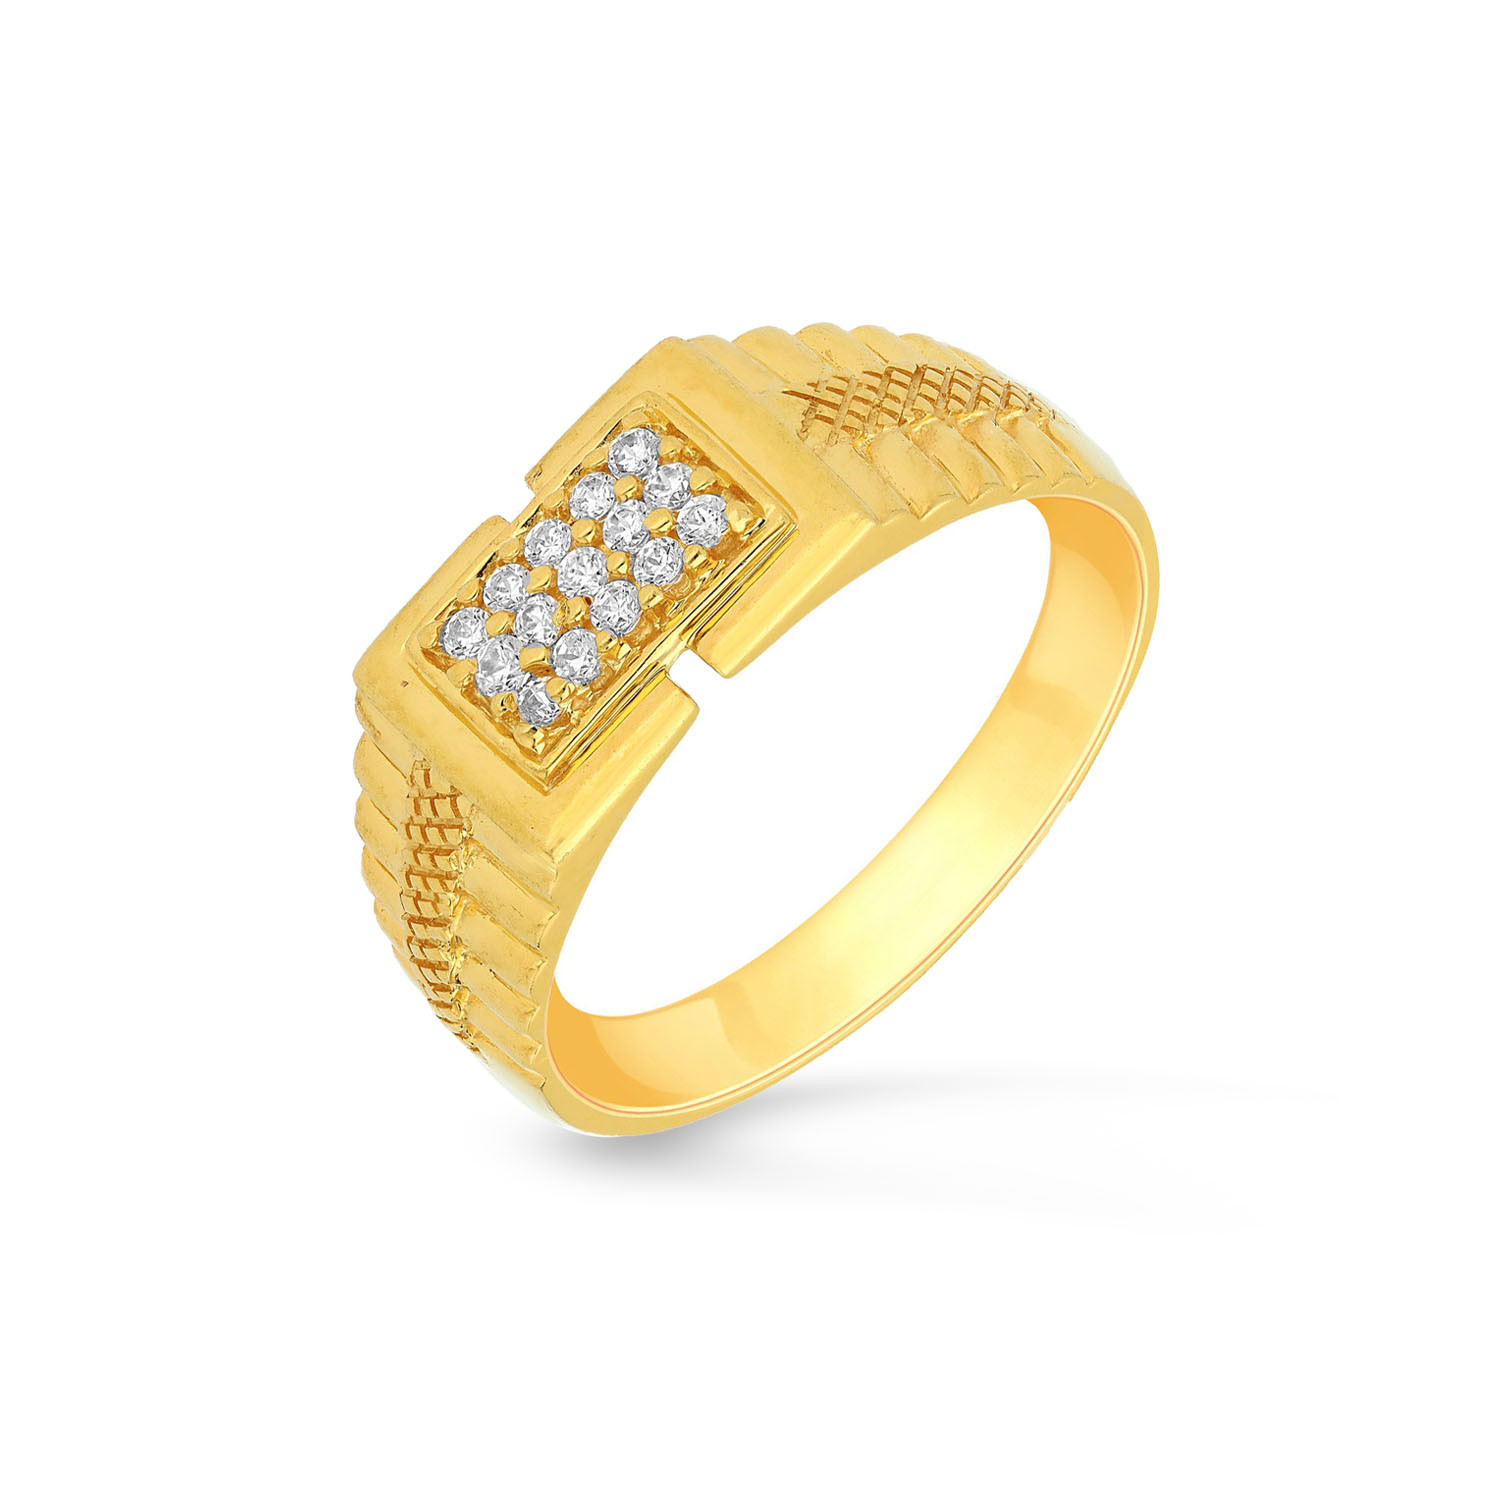 Buy MALABAR GOLD AND DIAMONDS Mens Mine Diamond Ring - Size 18 | Shoppers  Stop